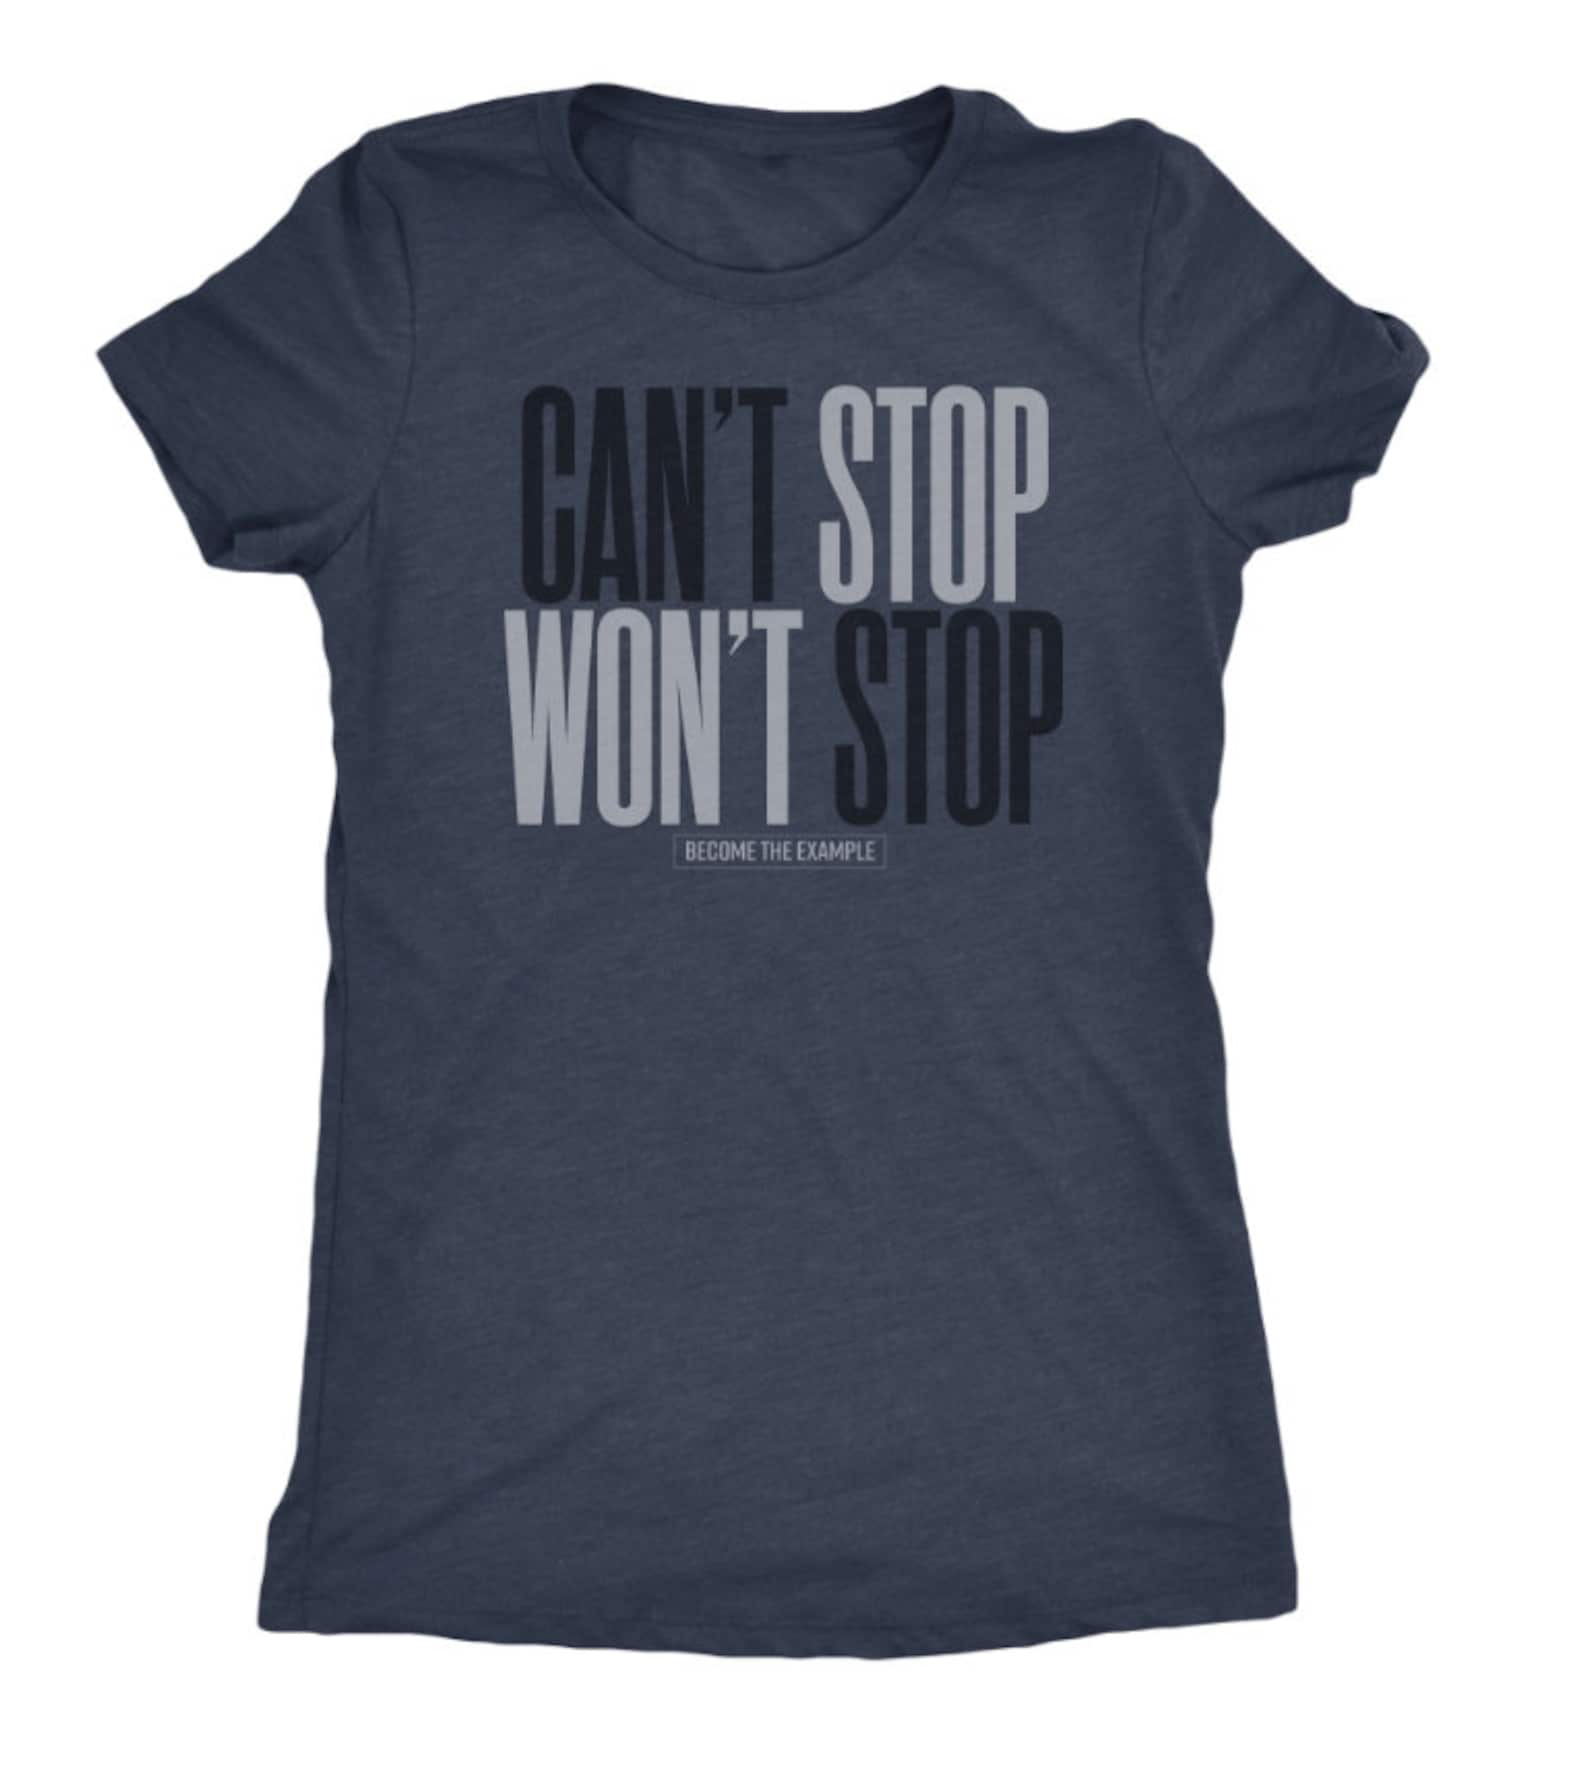 Can't Stop Won't Stop Short Sleeve Ladies T-shirt | Etsy